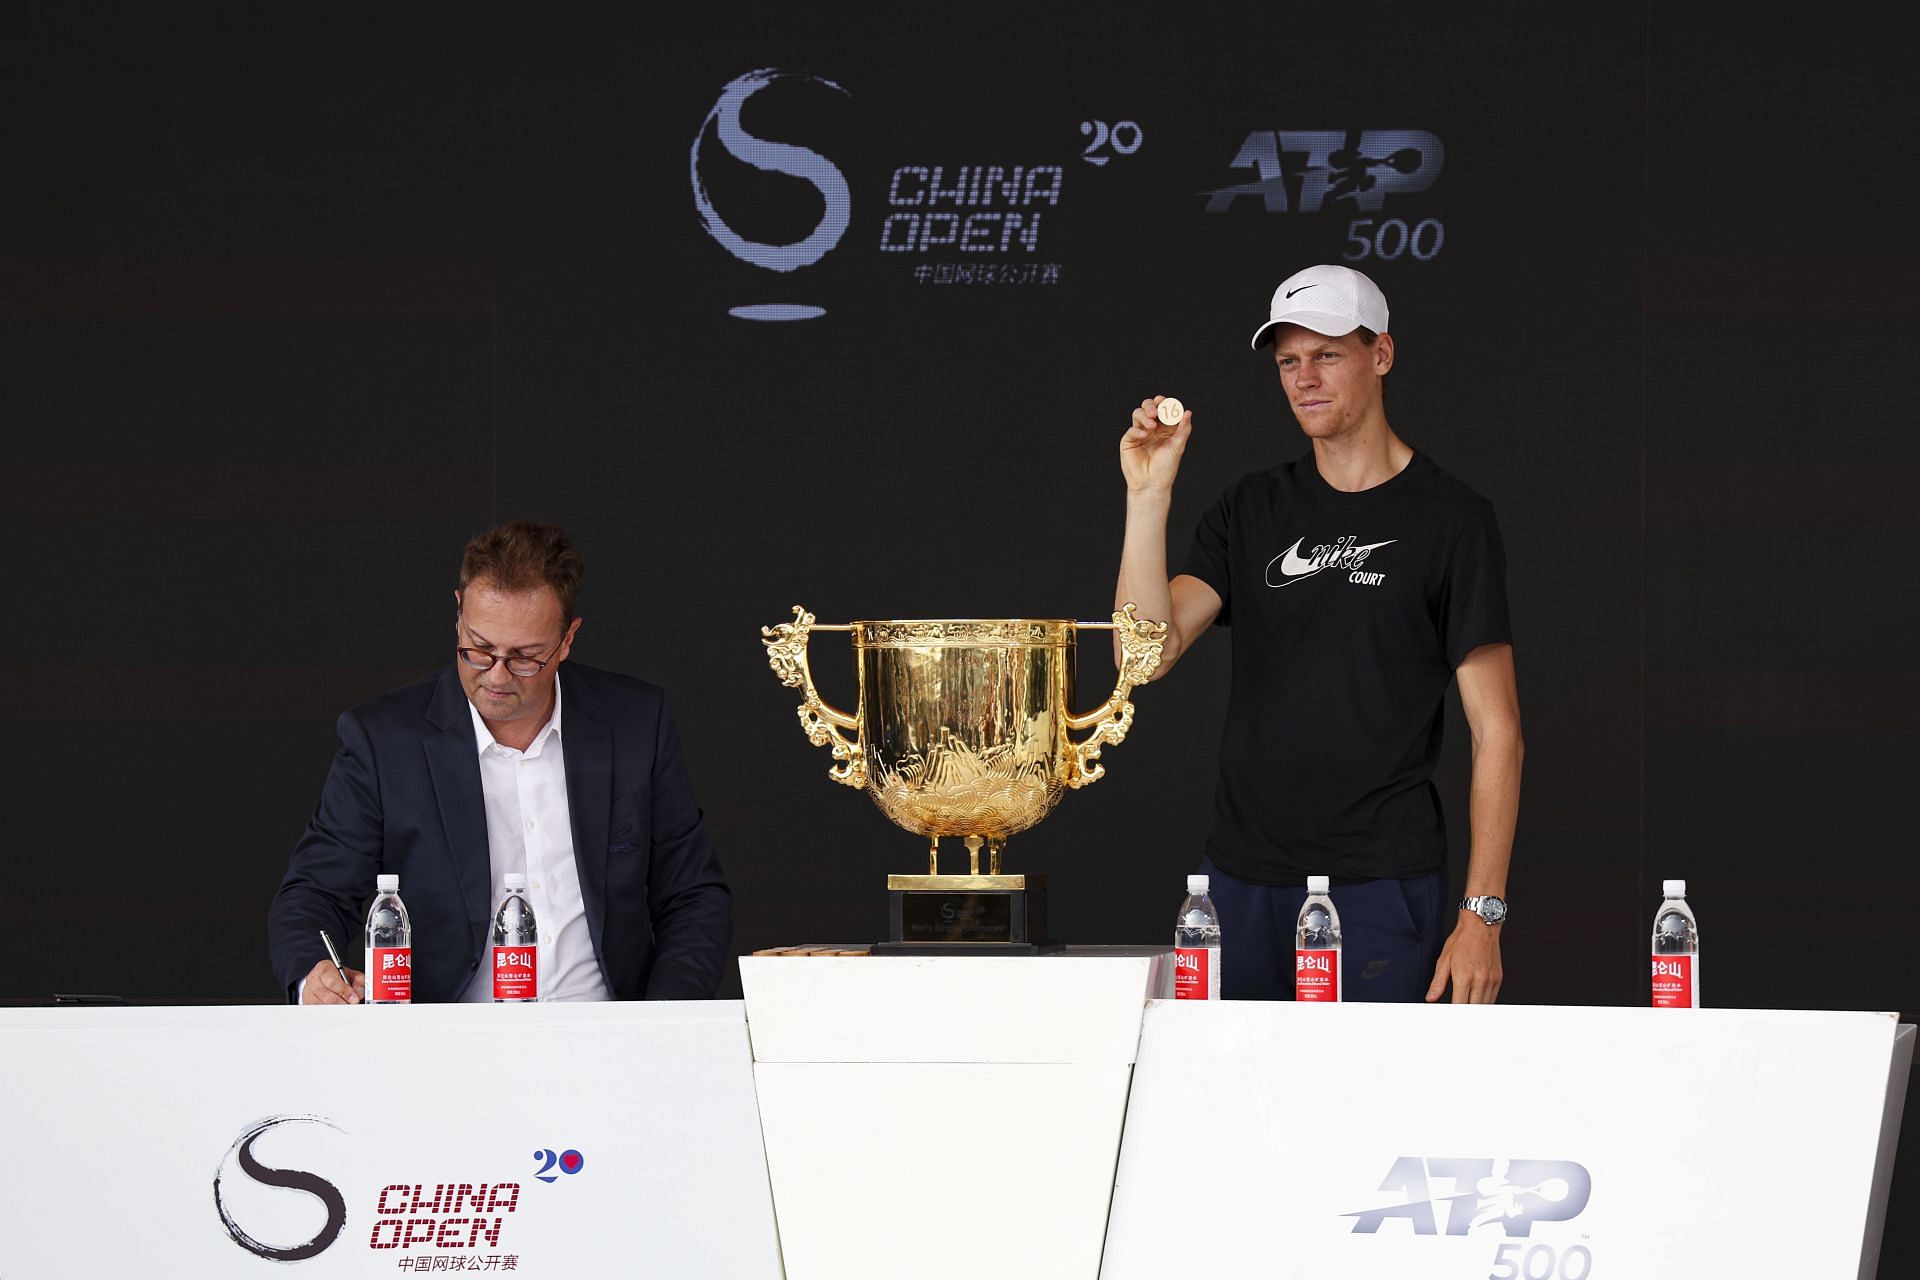 "The most stacked ATP 500 draw I've seen in years" Tennis fans react